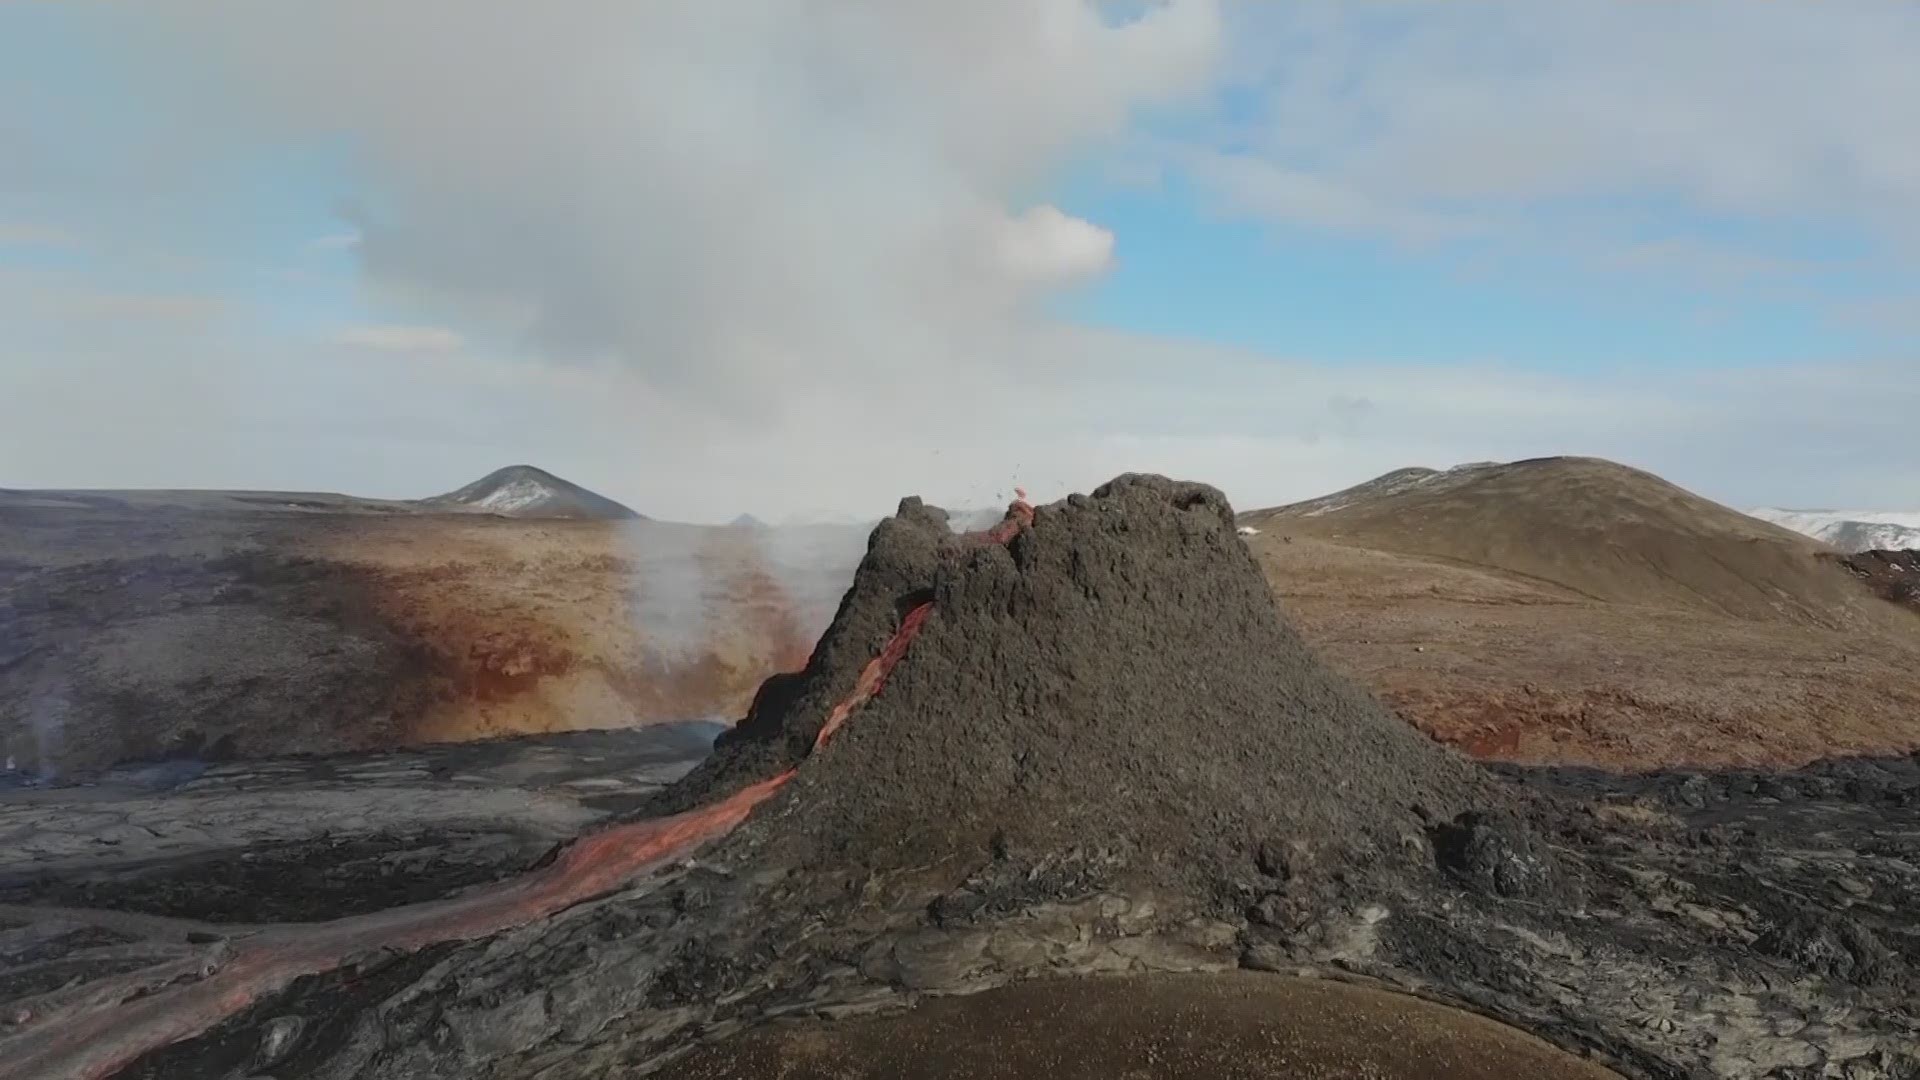 The eruption of a long-dormant volcano in southwestern Iceland has drawn large crowds of visitors eager to get close to the lava flows.